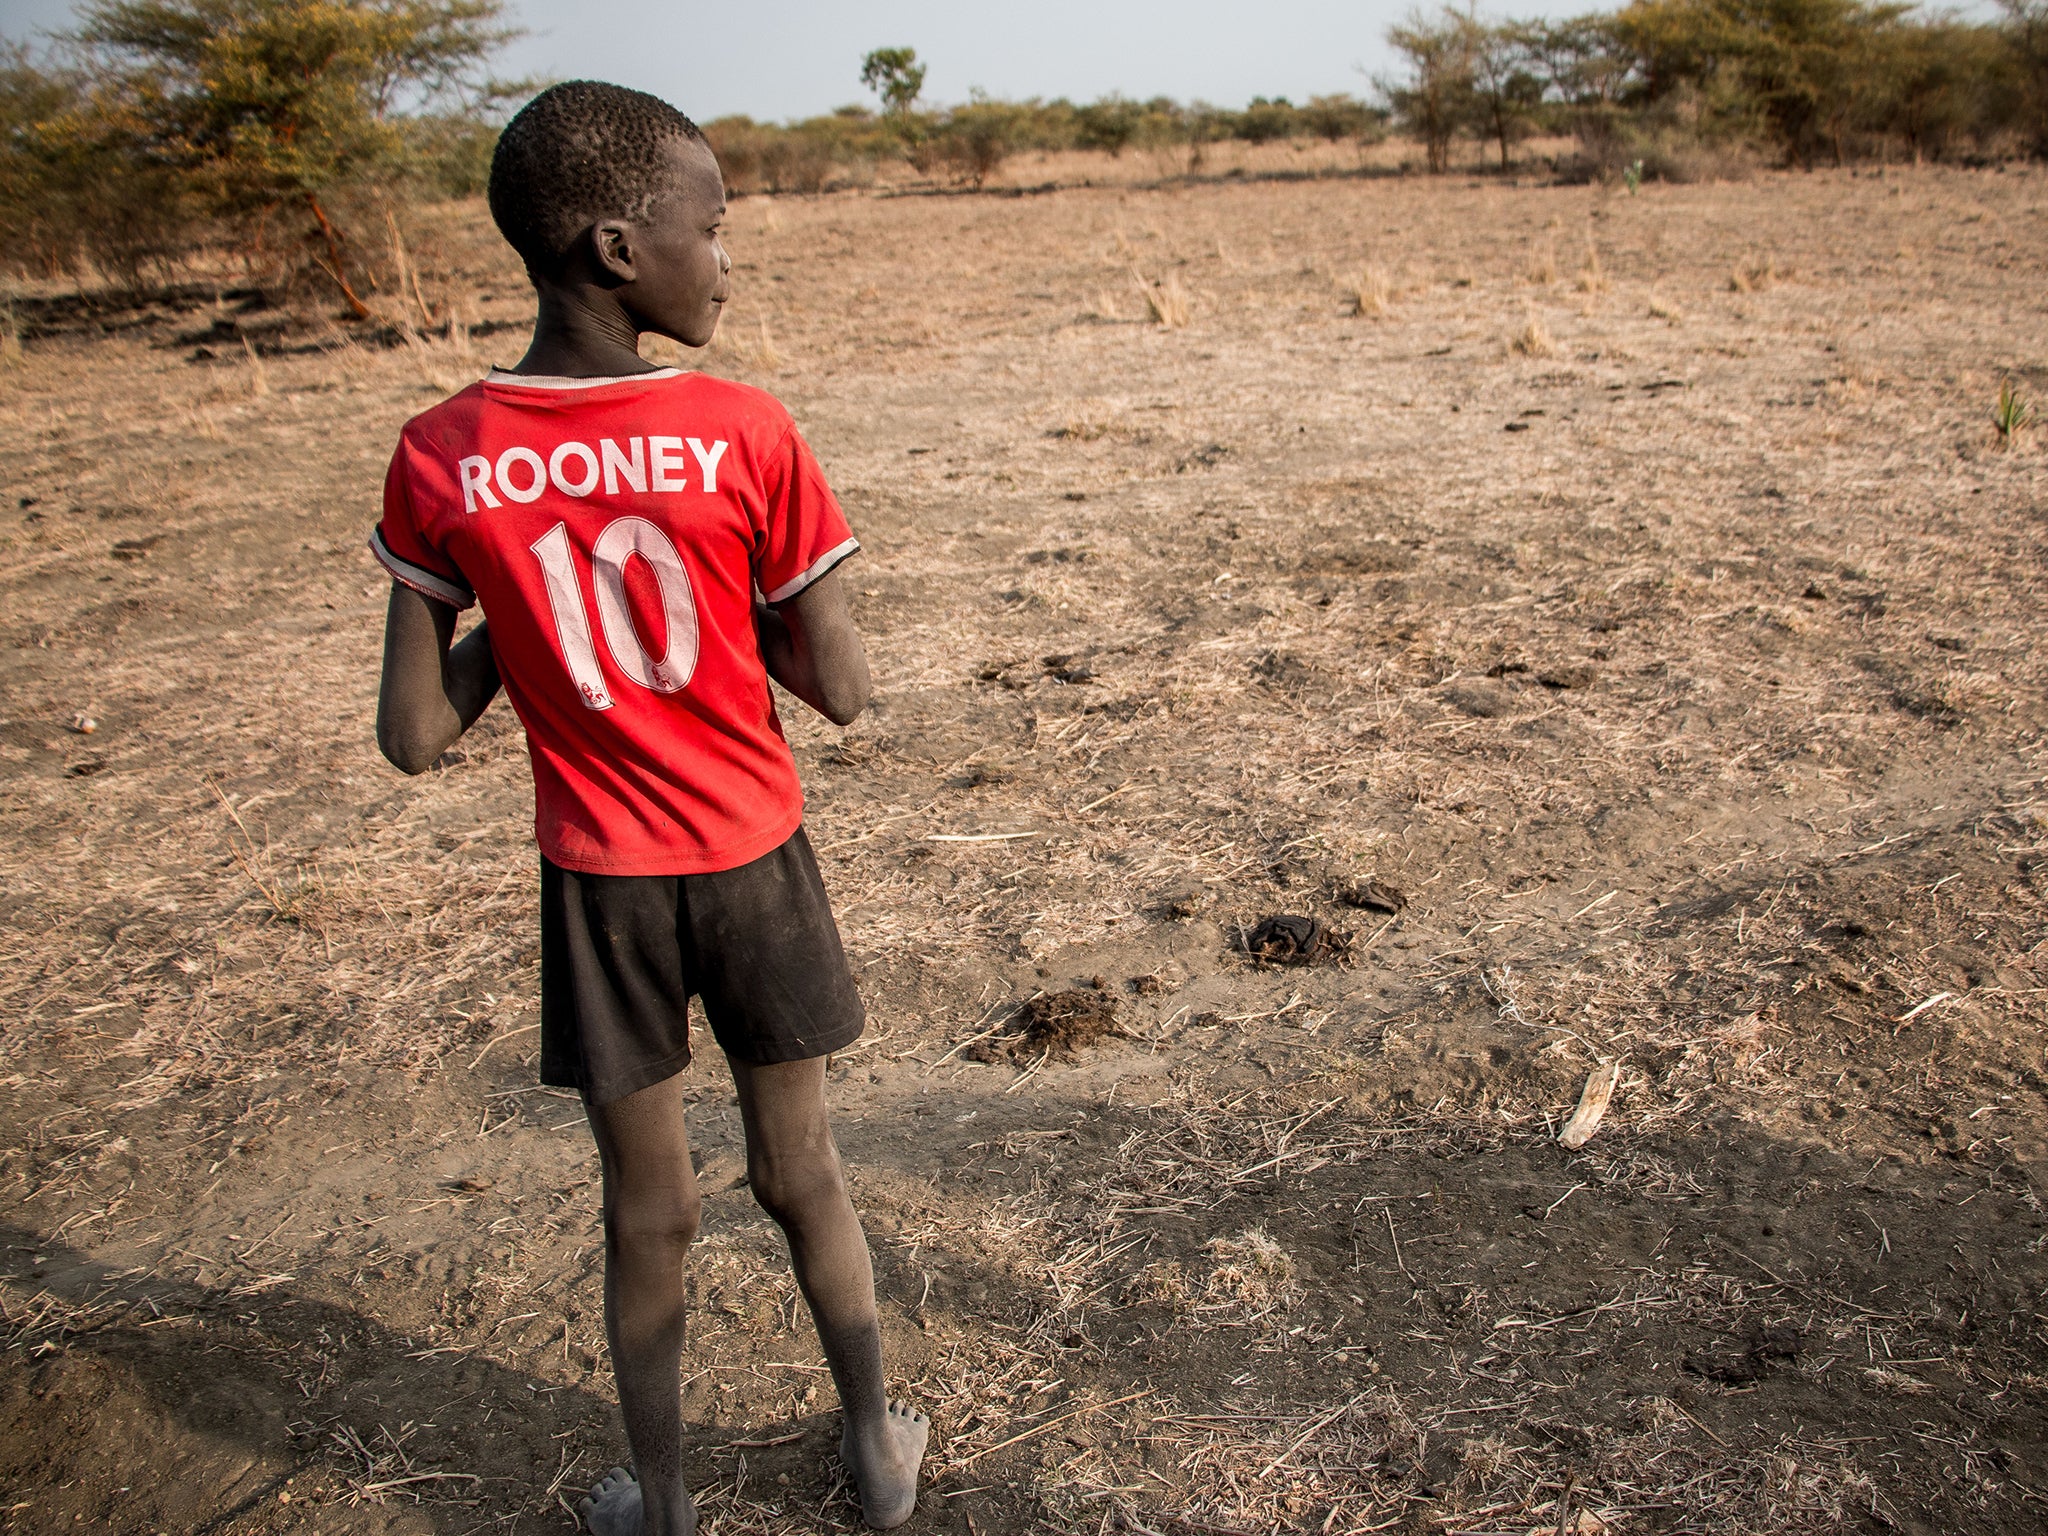 This would-be Wayne Rooney is just one of 40,000 facing famine